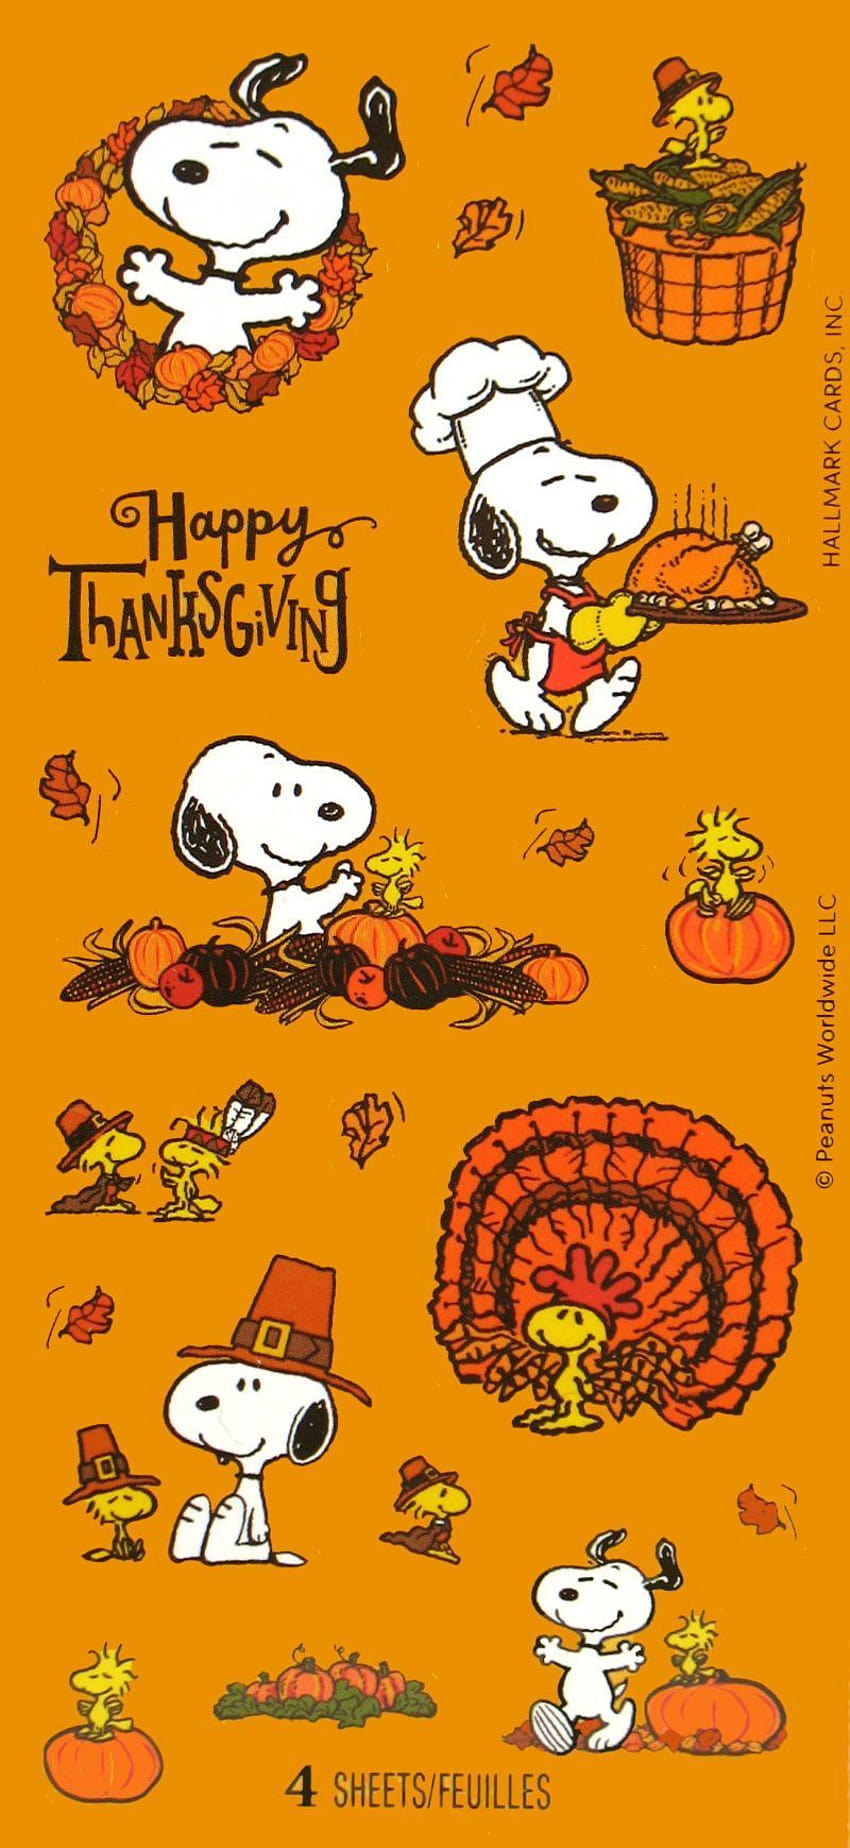 Thanksgiving Iphone posted by Zoey Cunningham, autumn peanuts HD phone wallpaper